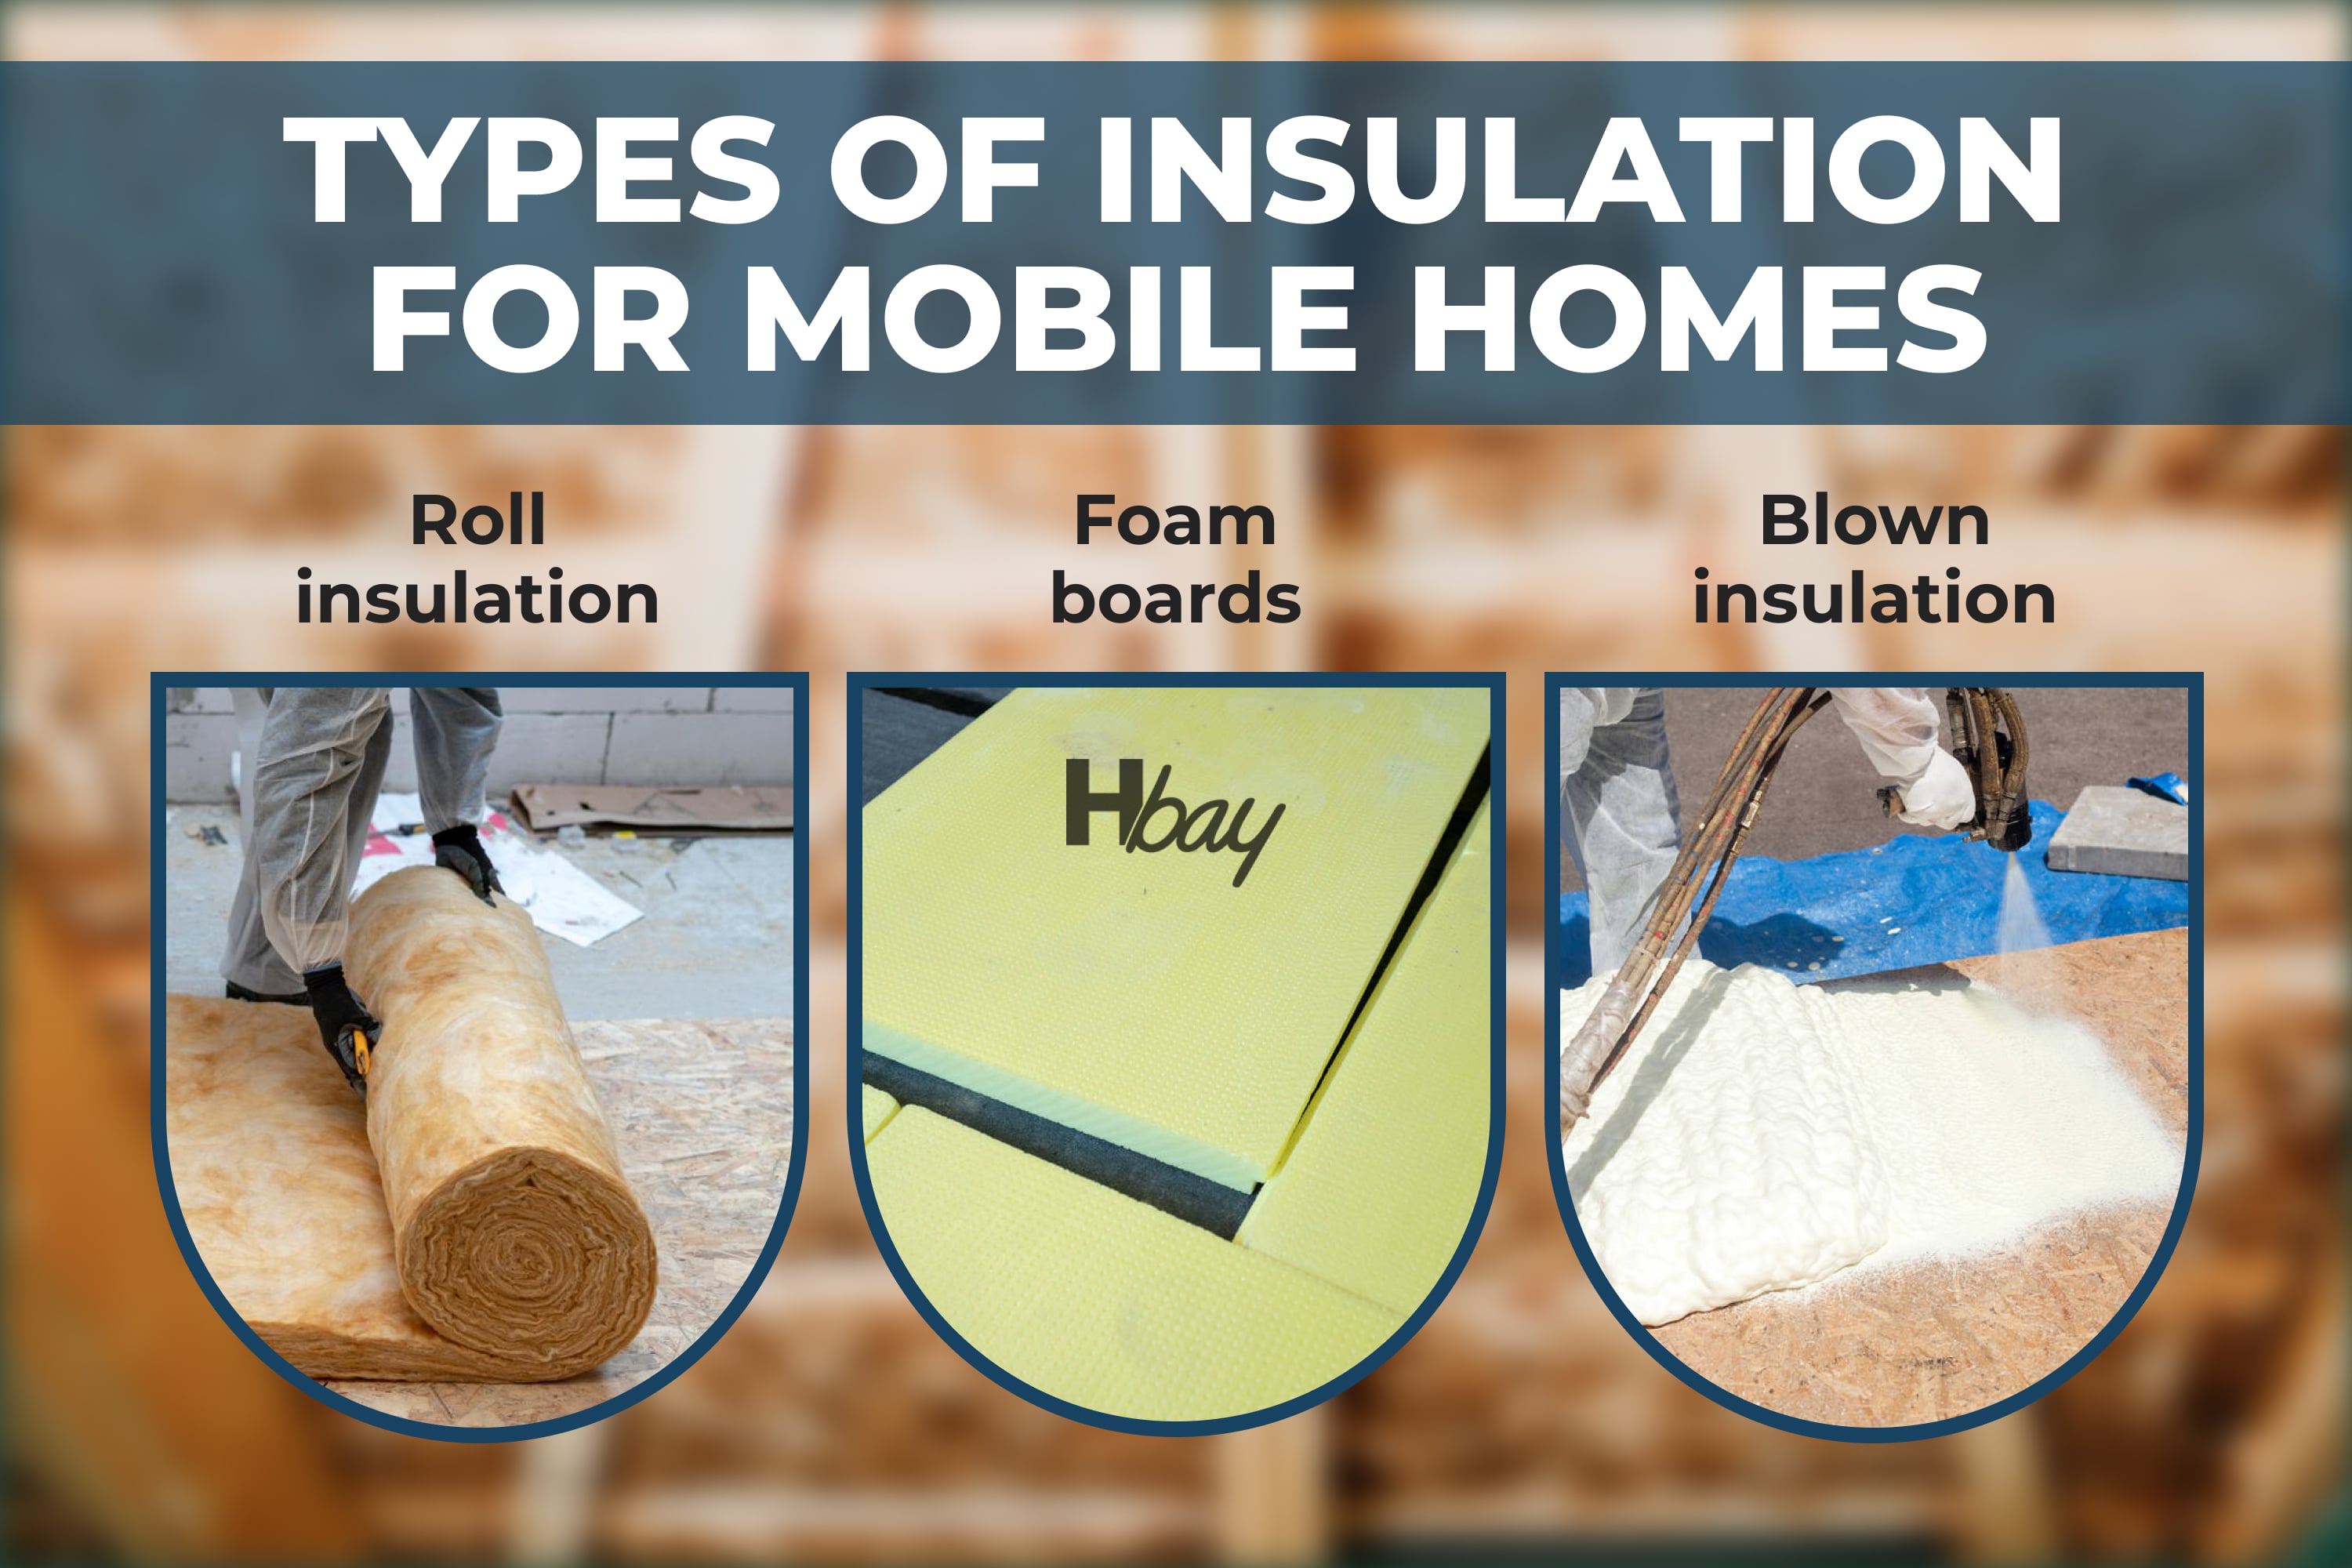 Types of insulation for mobile homes